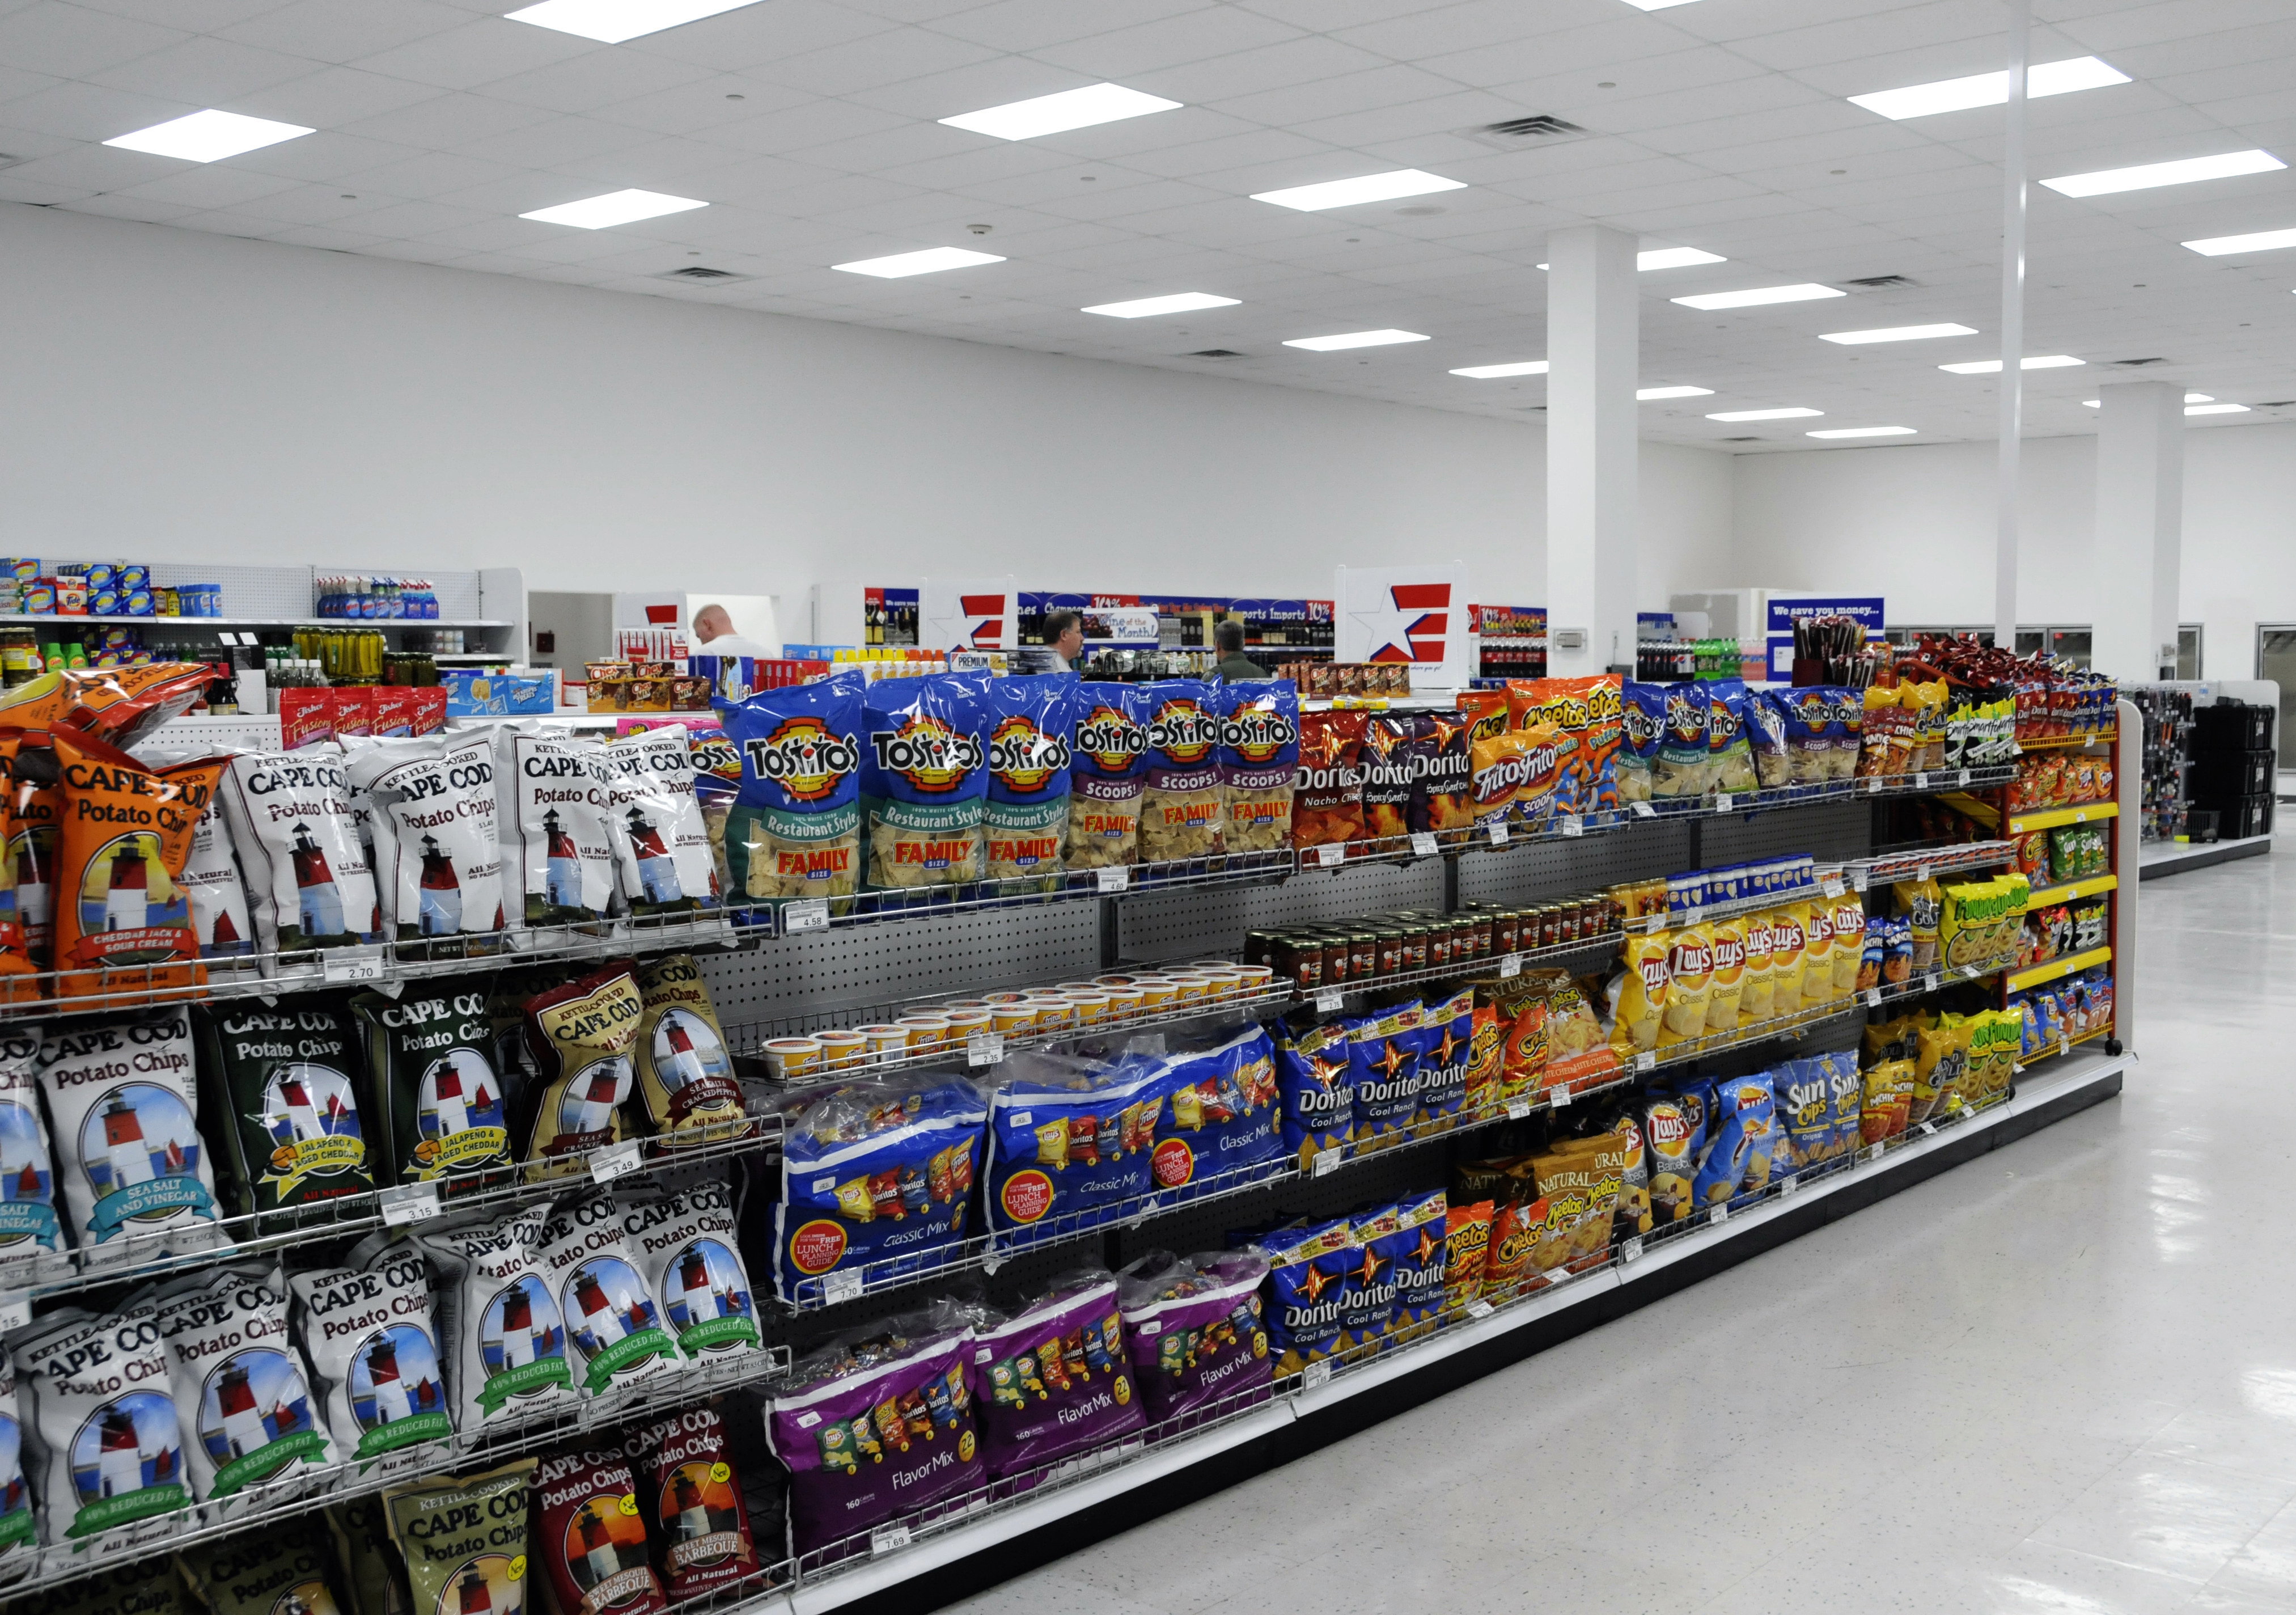 Homestead opens new shoppette > Homestead Air Reserve Base > Article Display